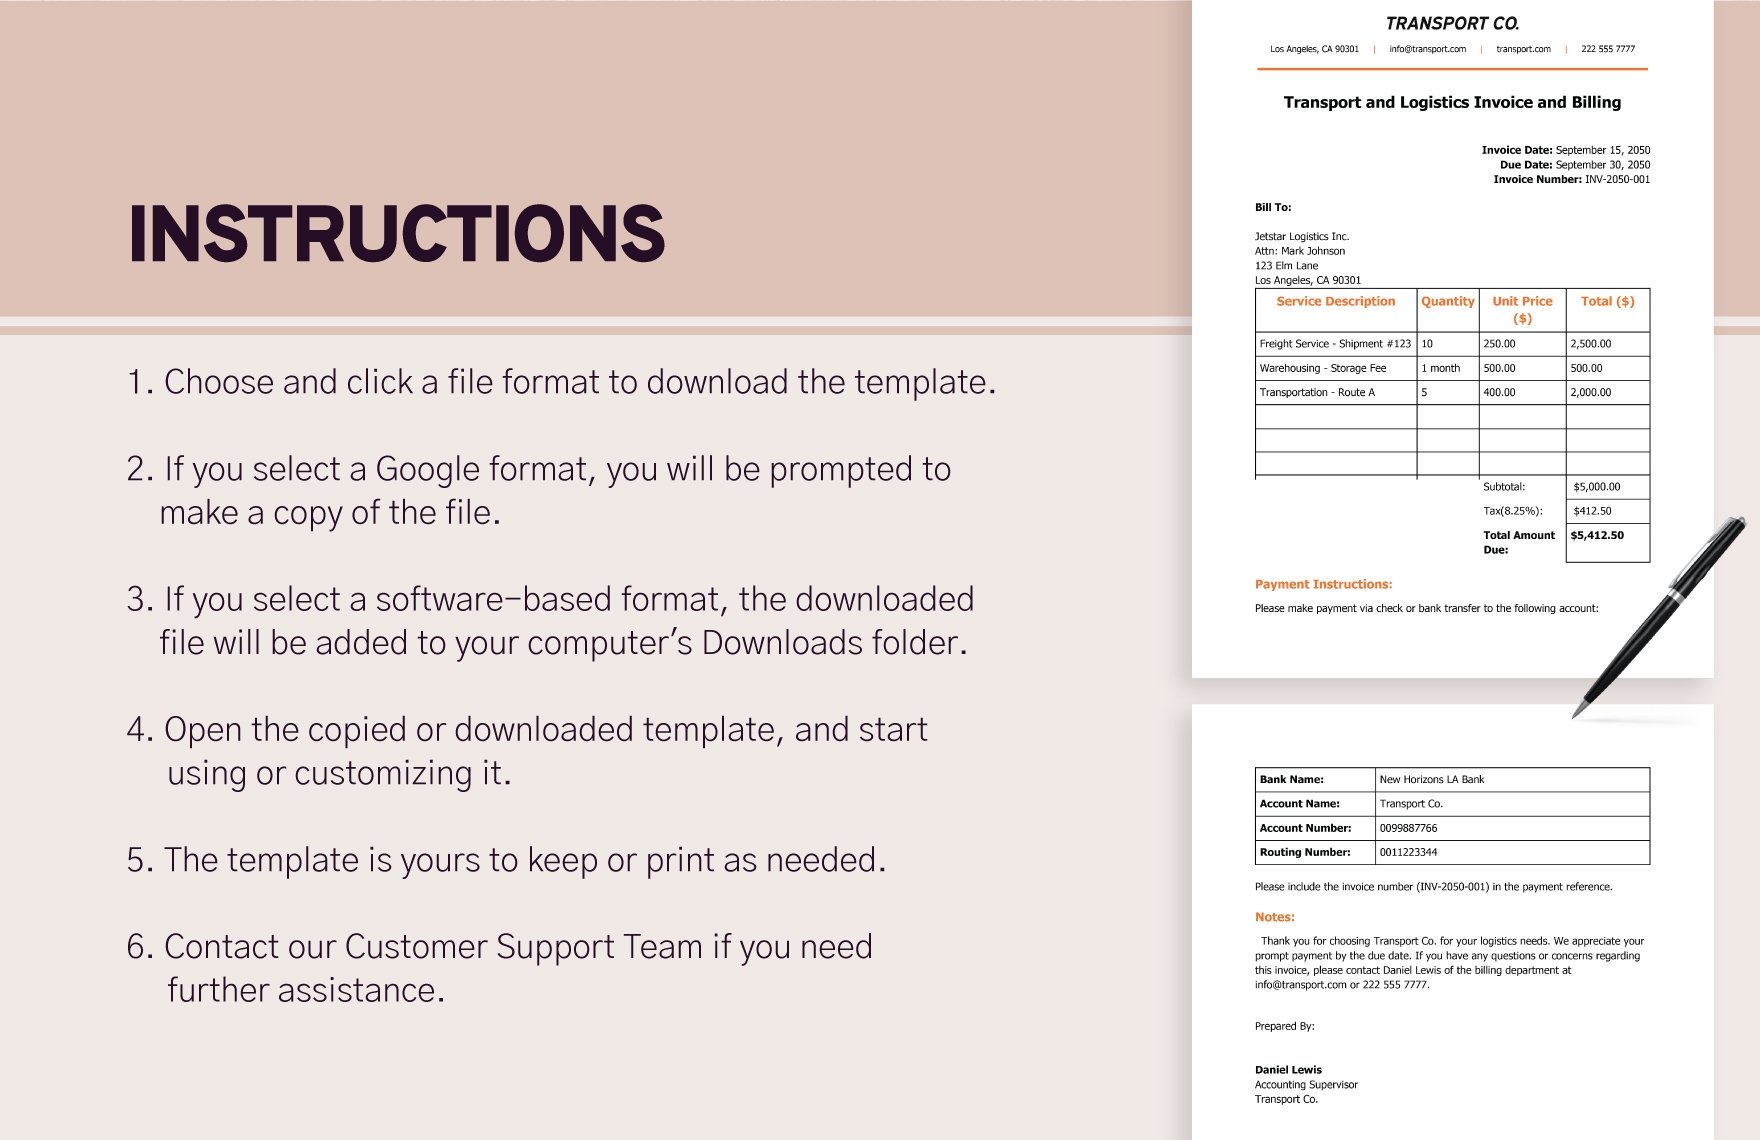 Transport and Logistics Invoice and Billing Template